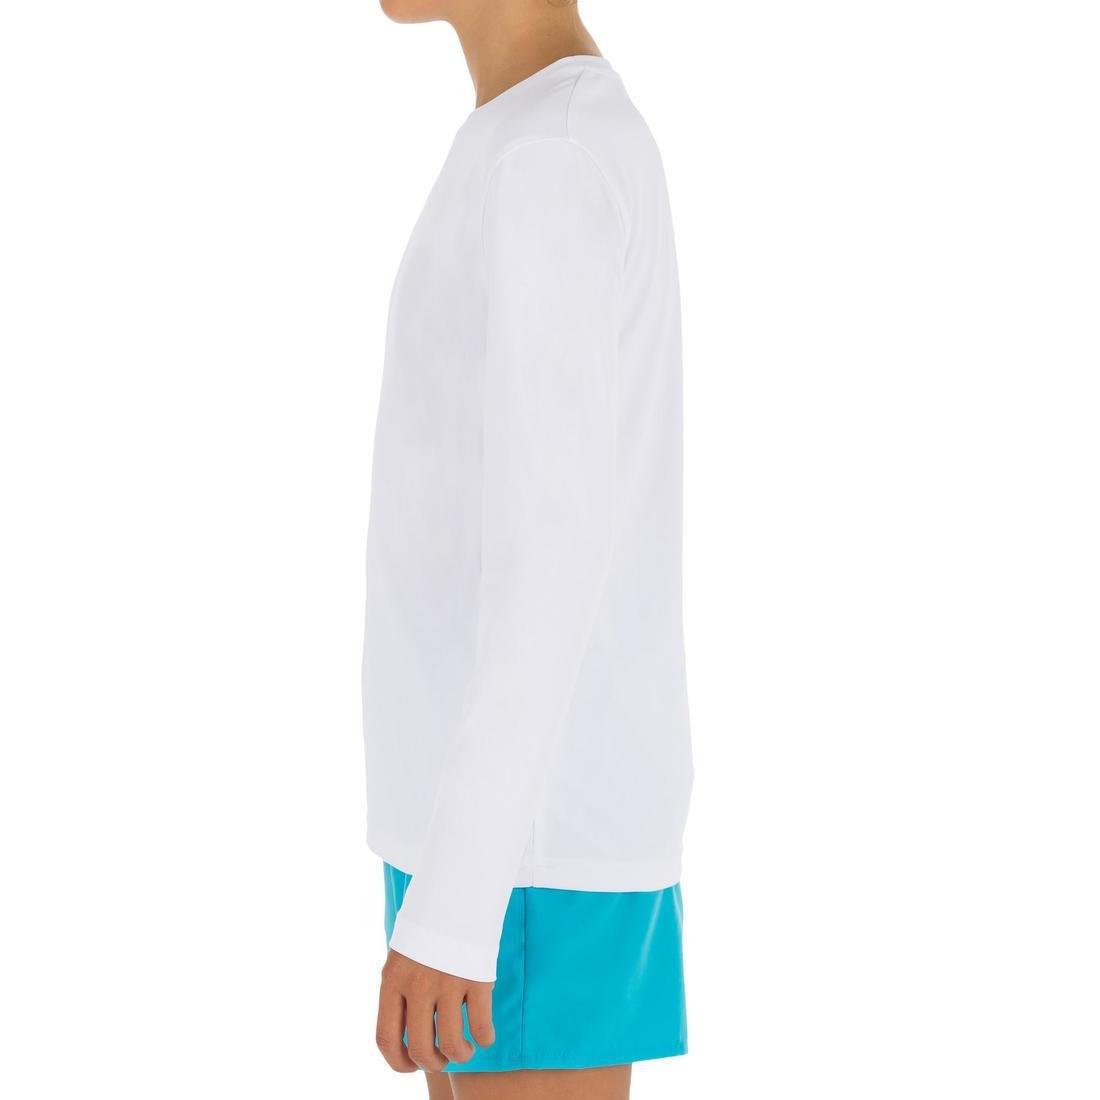 TRIBORD - Kids Long Sleeve Uv Protection Surfing Water T-Shirt, Snow White